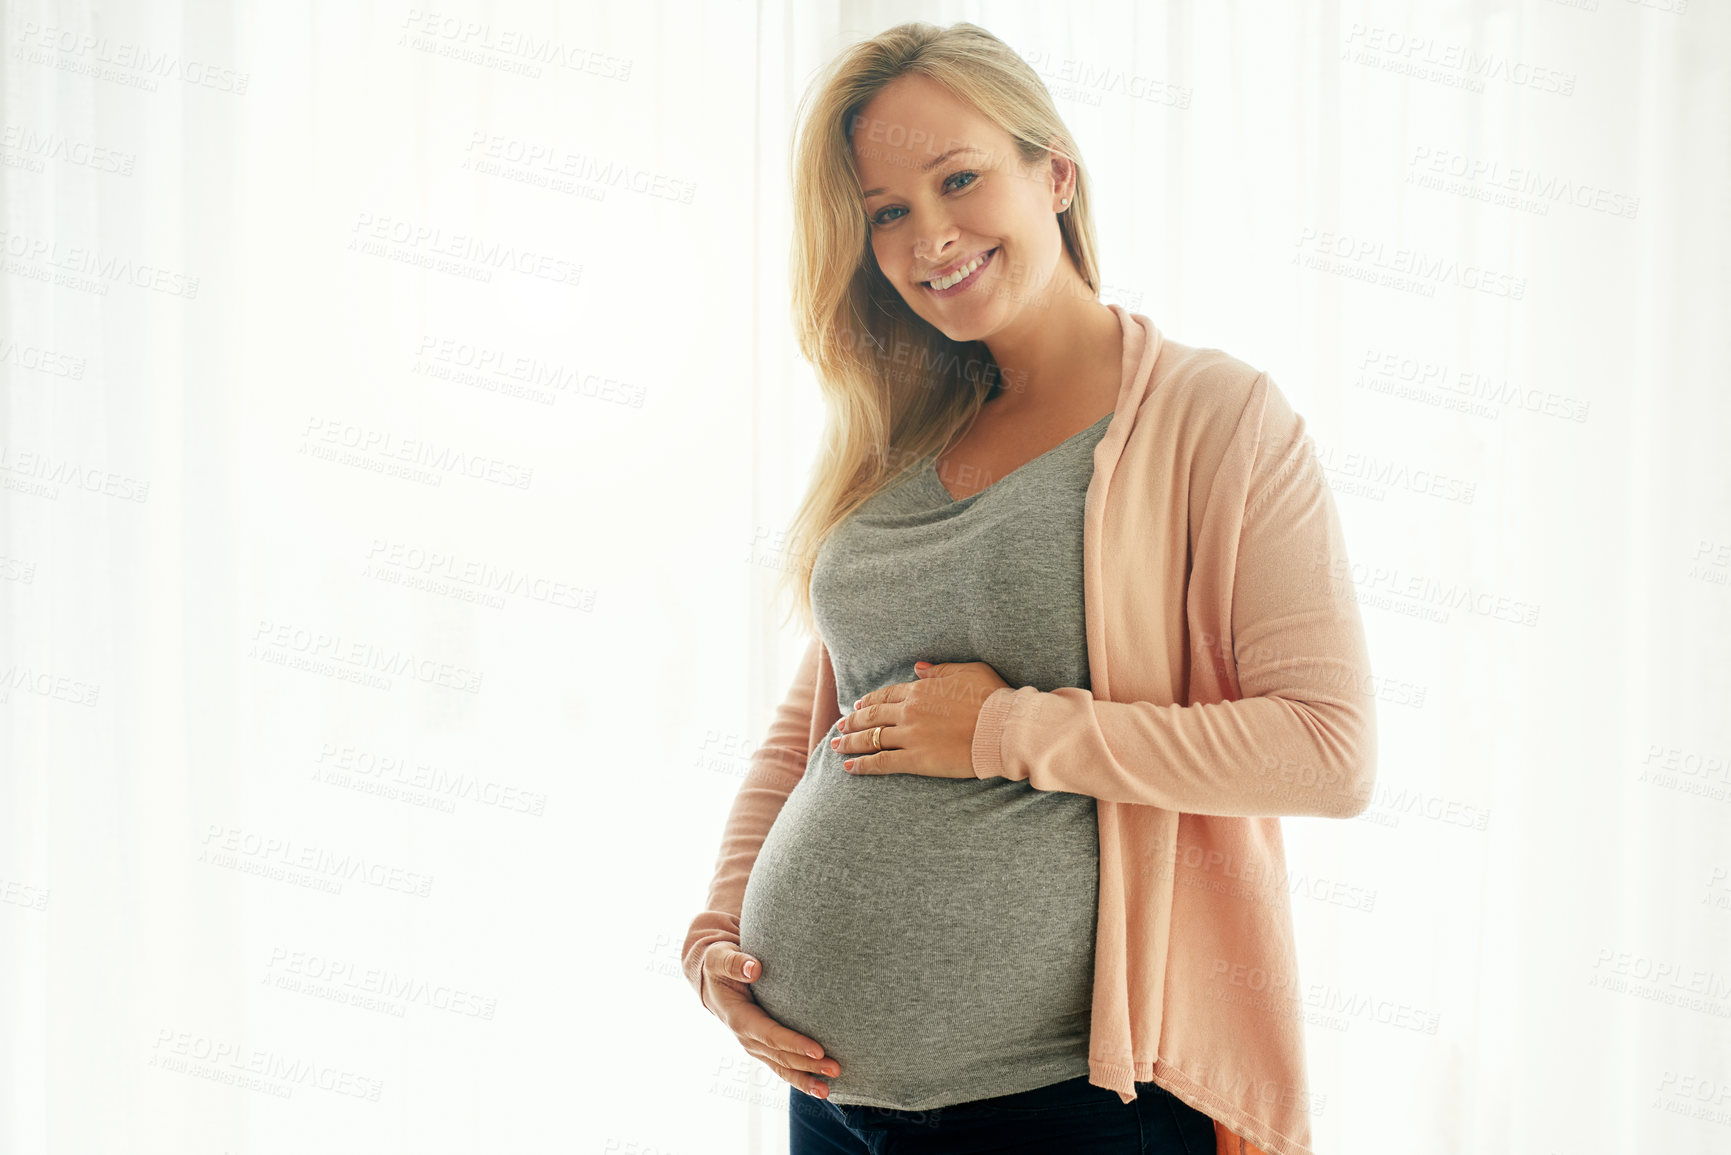 Buy stock photo Shot of a beautiful woman holding on to her pregnant belly